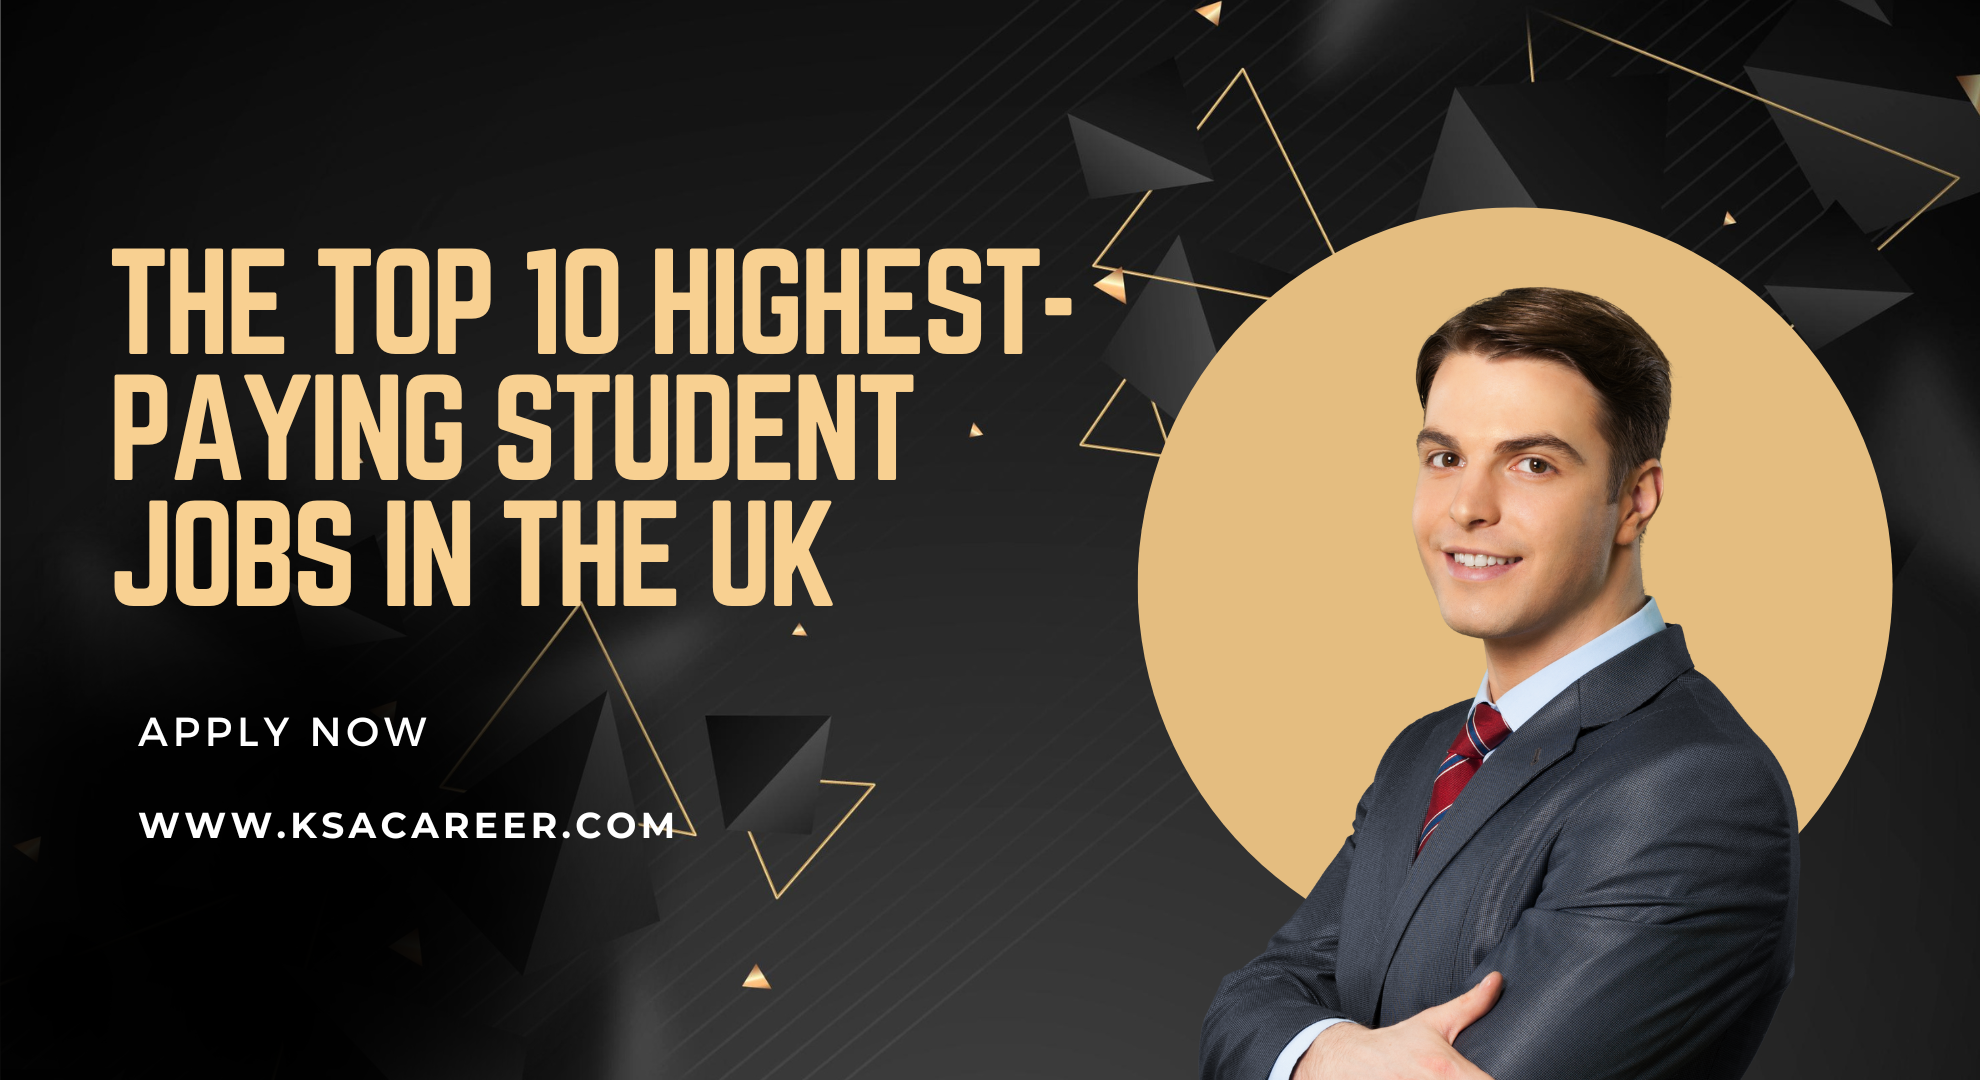 The Top 10 Highest-Paying Student Jobs in the UK